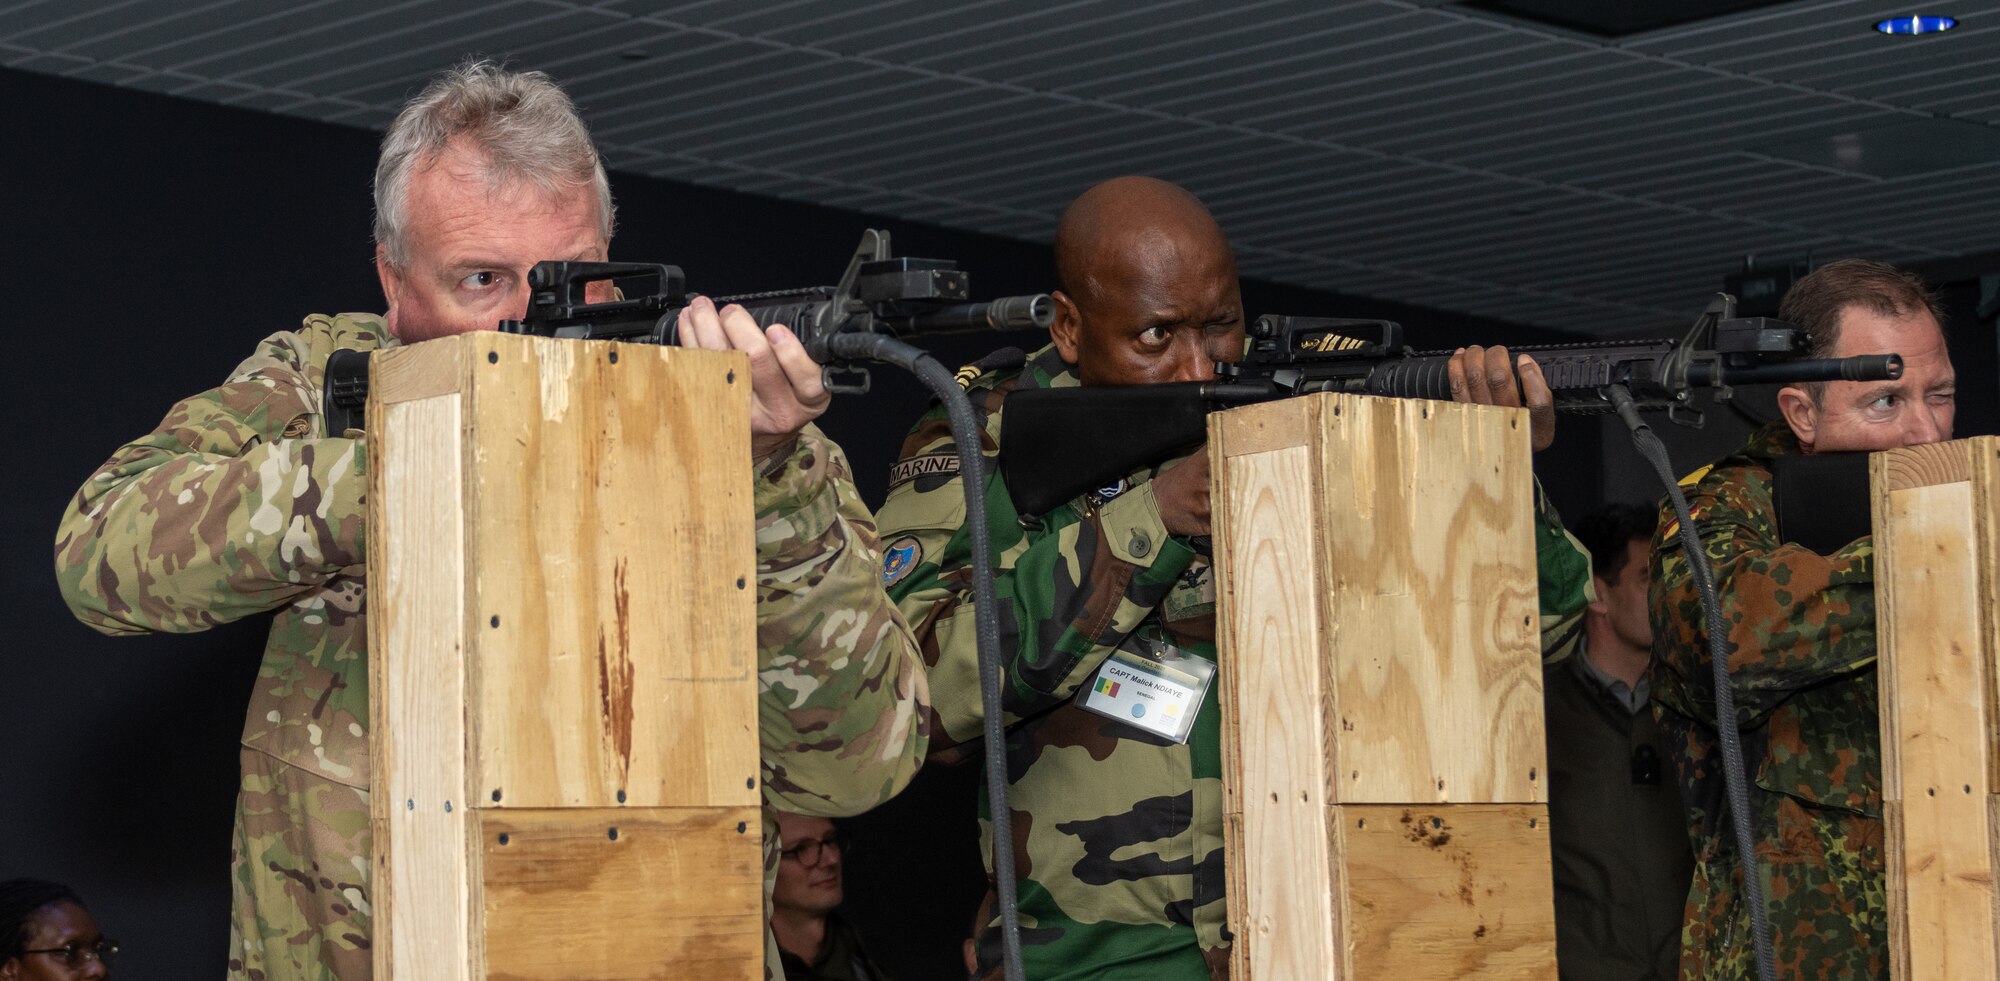 Defense attachés Brig. Gen. Michael Shapland of New Zealand, Capt. Malick Ndiaye of Senegal, and Rear Adm. Axel Ristau of Germany fire at targets on a range simulator at Fort Indiantown Gap’s Training Support Center Nov. 16, 2022, during the Defense Intelligence Agency’s Fall 2022 Operations Orientation Program tour of Pennsylvania National Guard facilities.